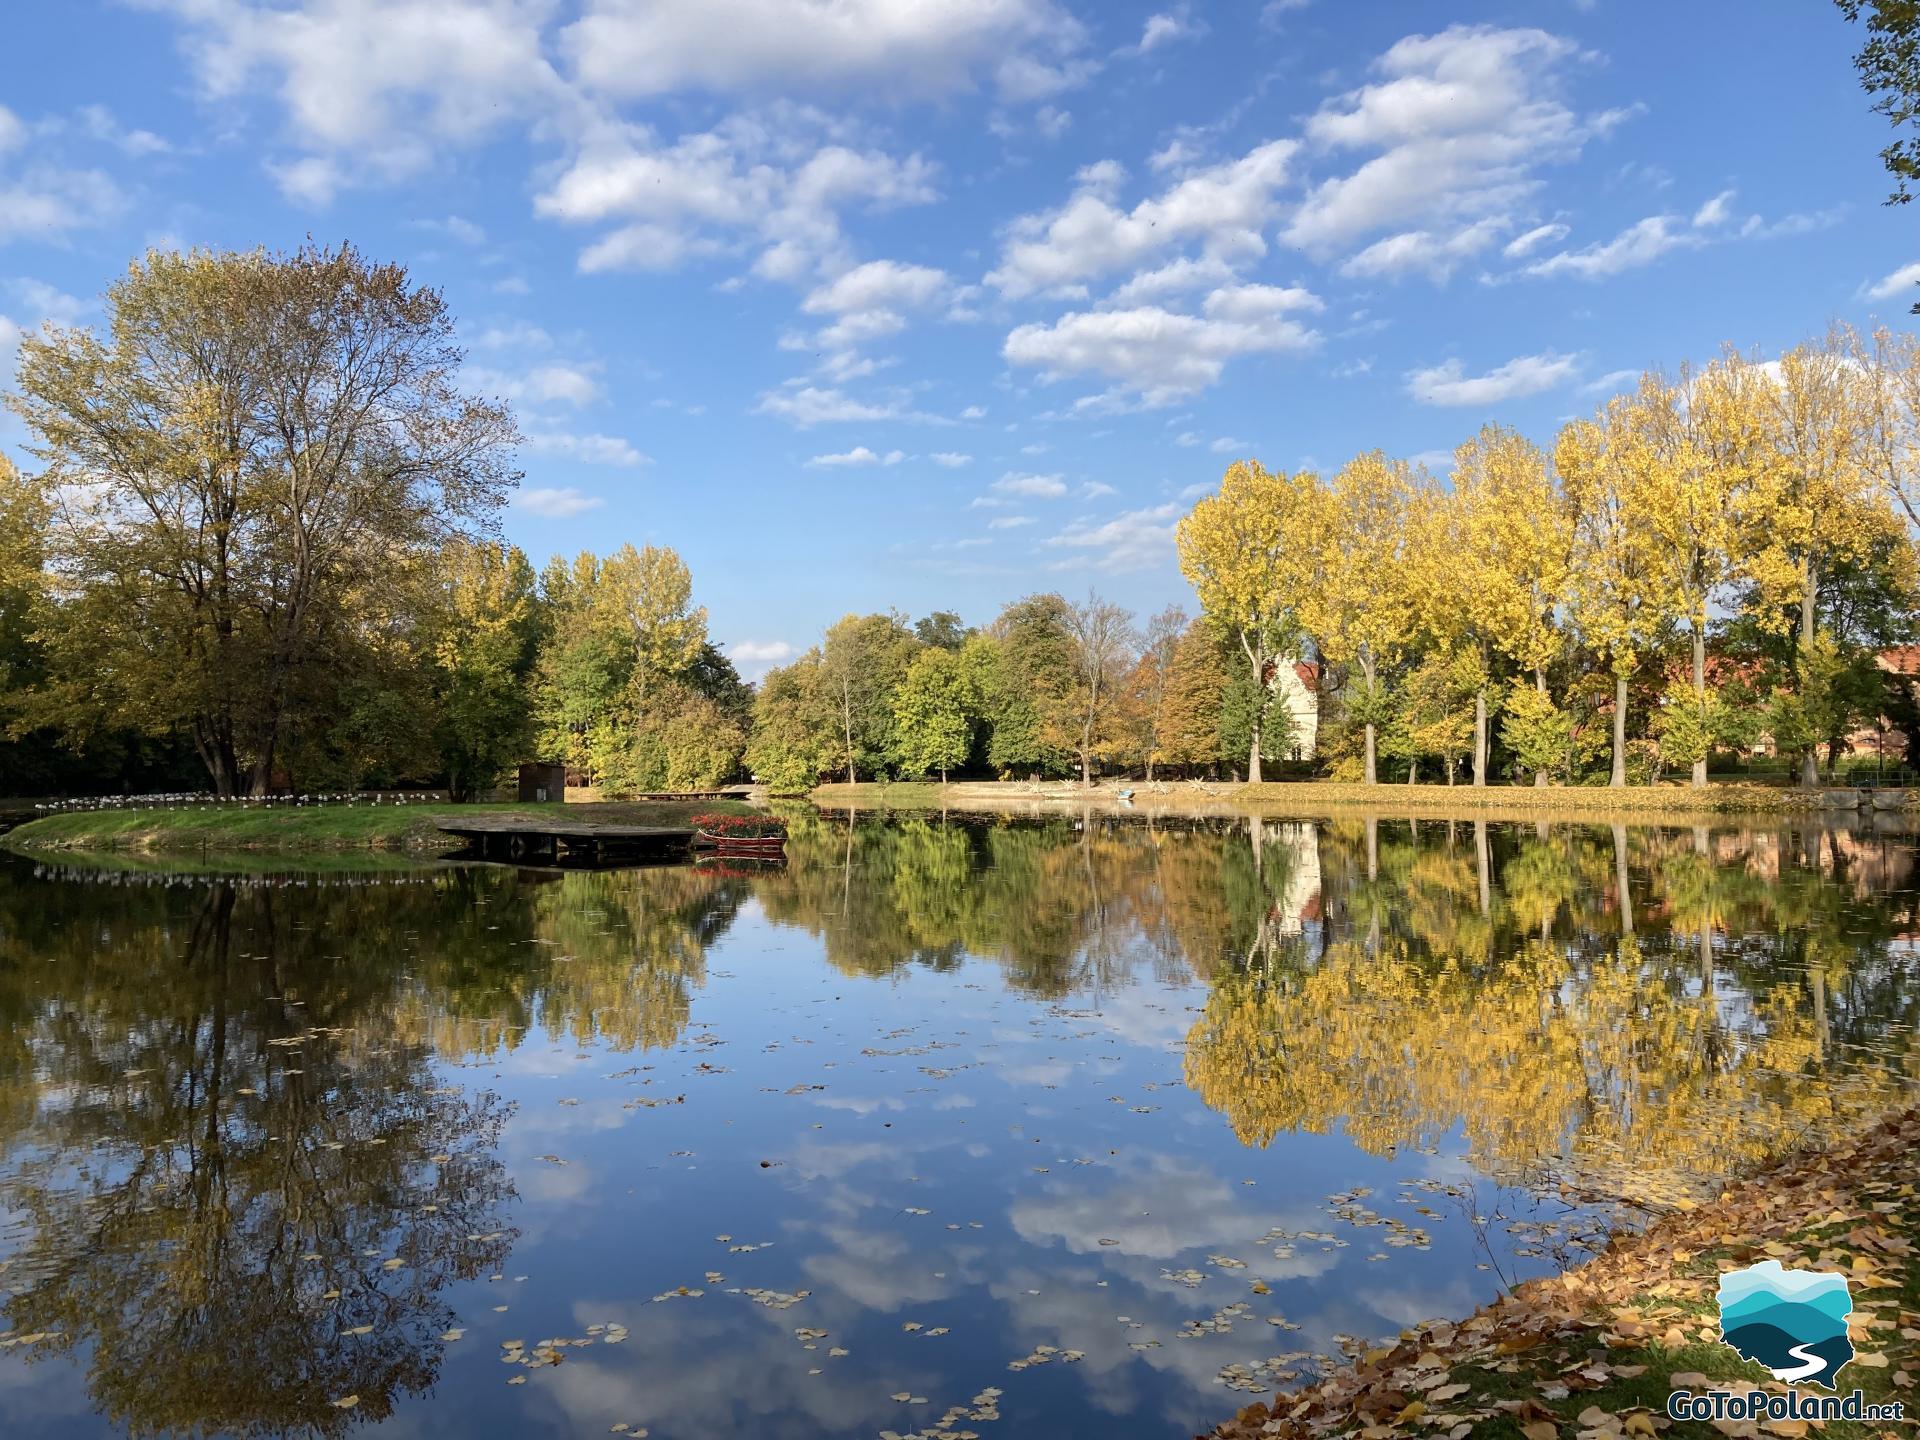 Pond in autumn. The leaves have fallen, they are on the water, large trees with yellow leaves in the background